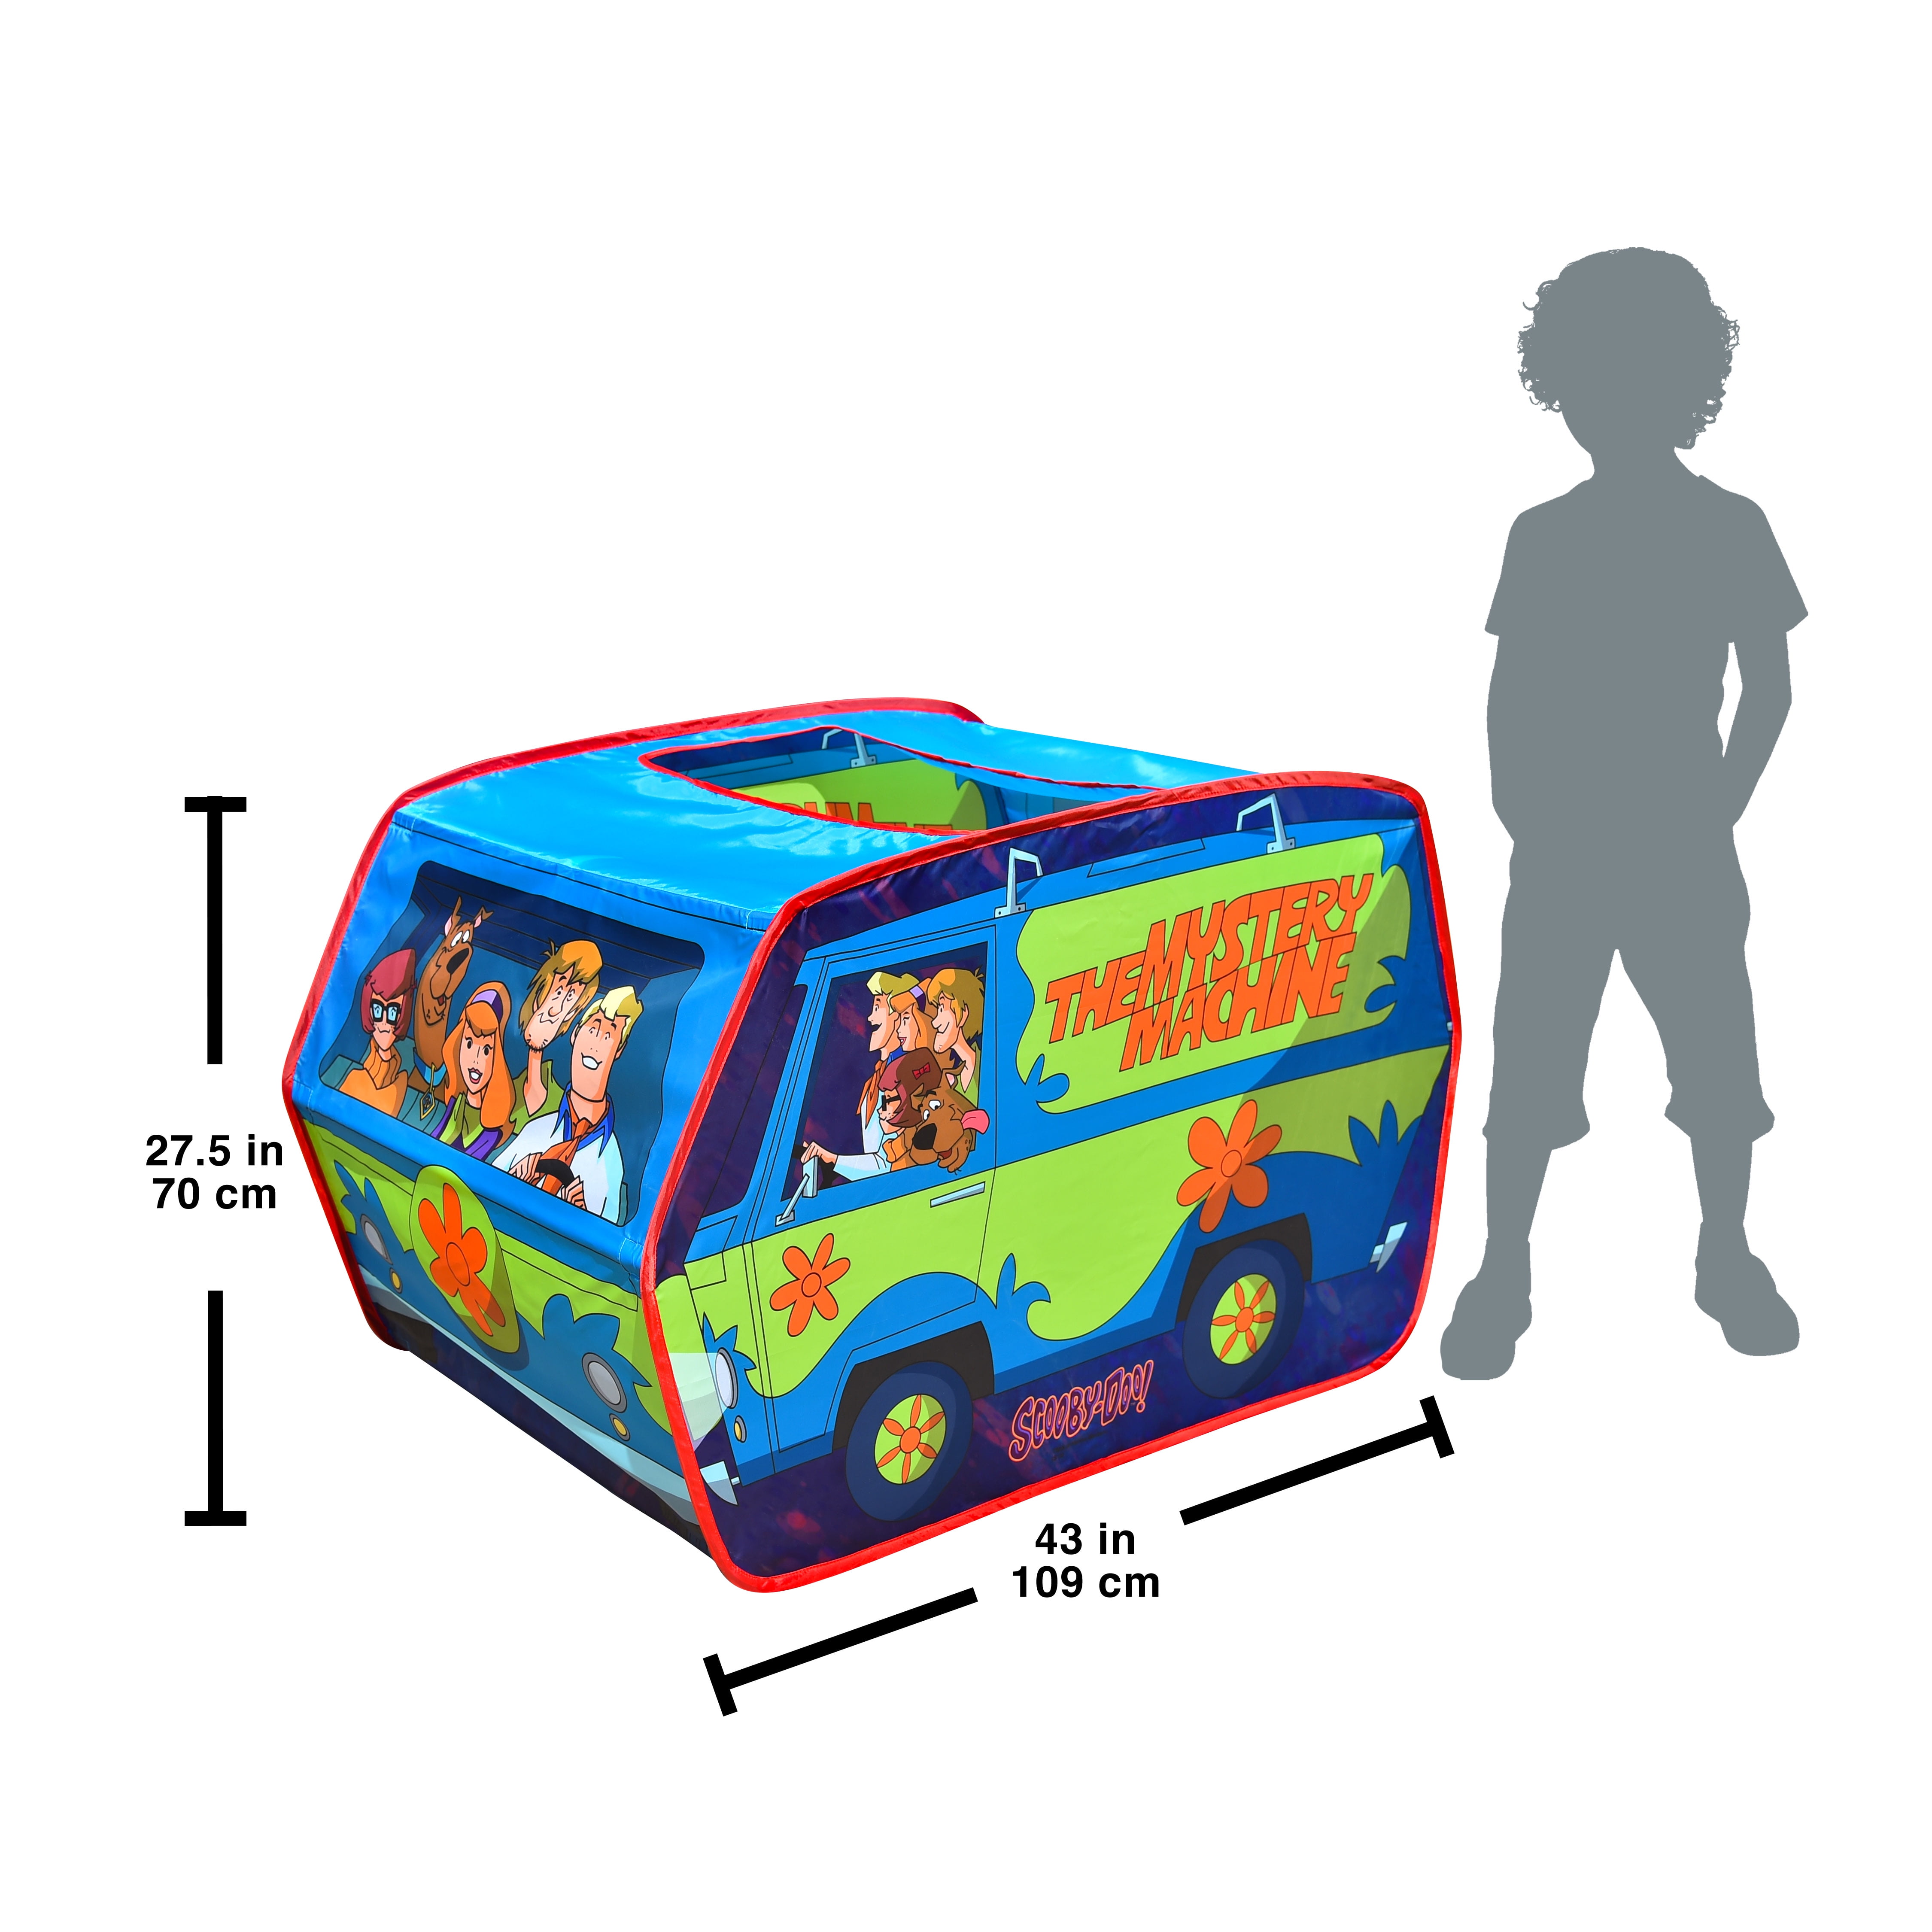 Toy Gift for Boys and Girls Entertainment Indoor Playhouse for Kids Sunny Days Scooby Doo The Mystery Machine Pop Up Tent 